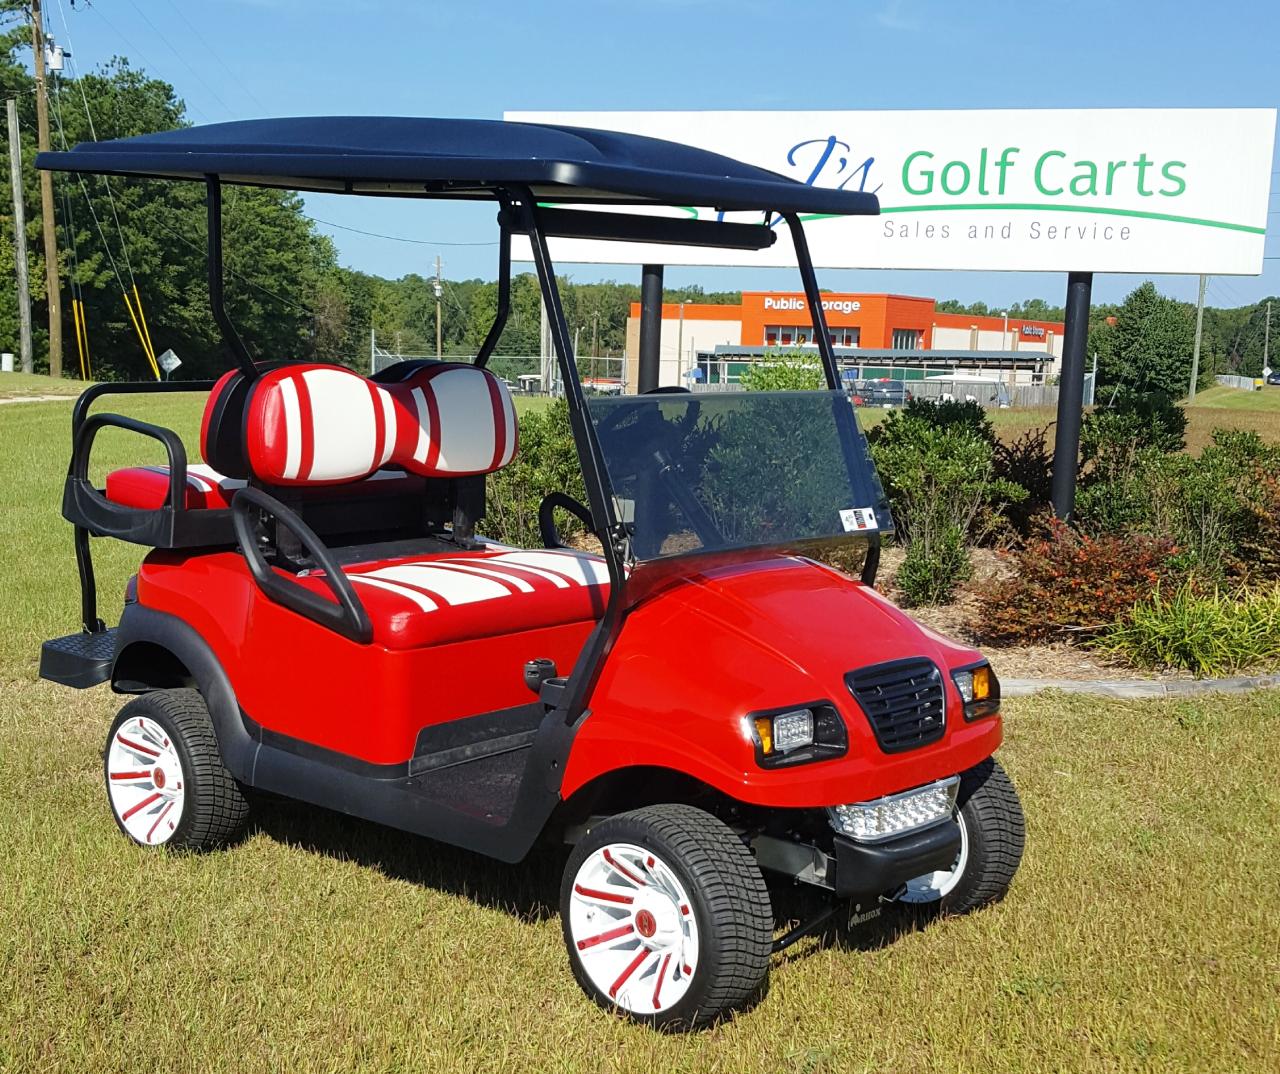 Find Your Dream Golf Cart: Used Golf Carts for Sale by Owner in Box Elder, Utah